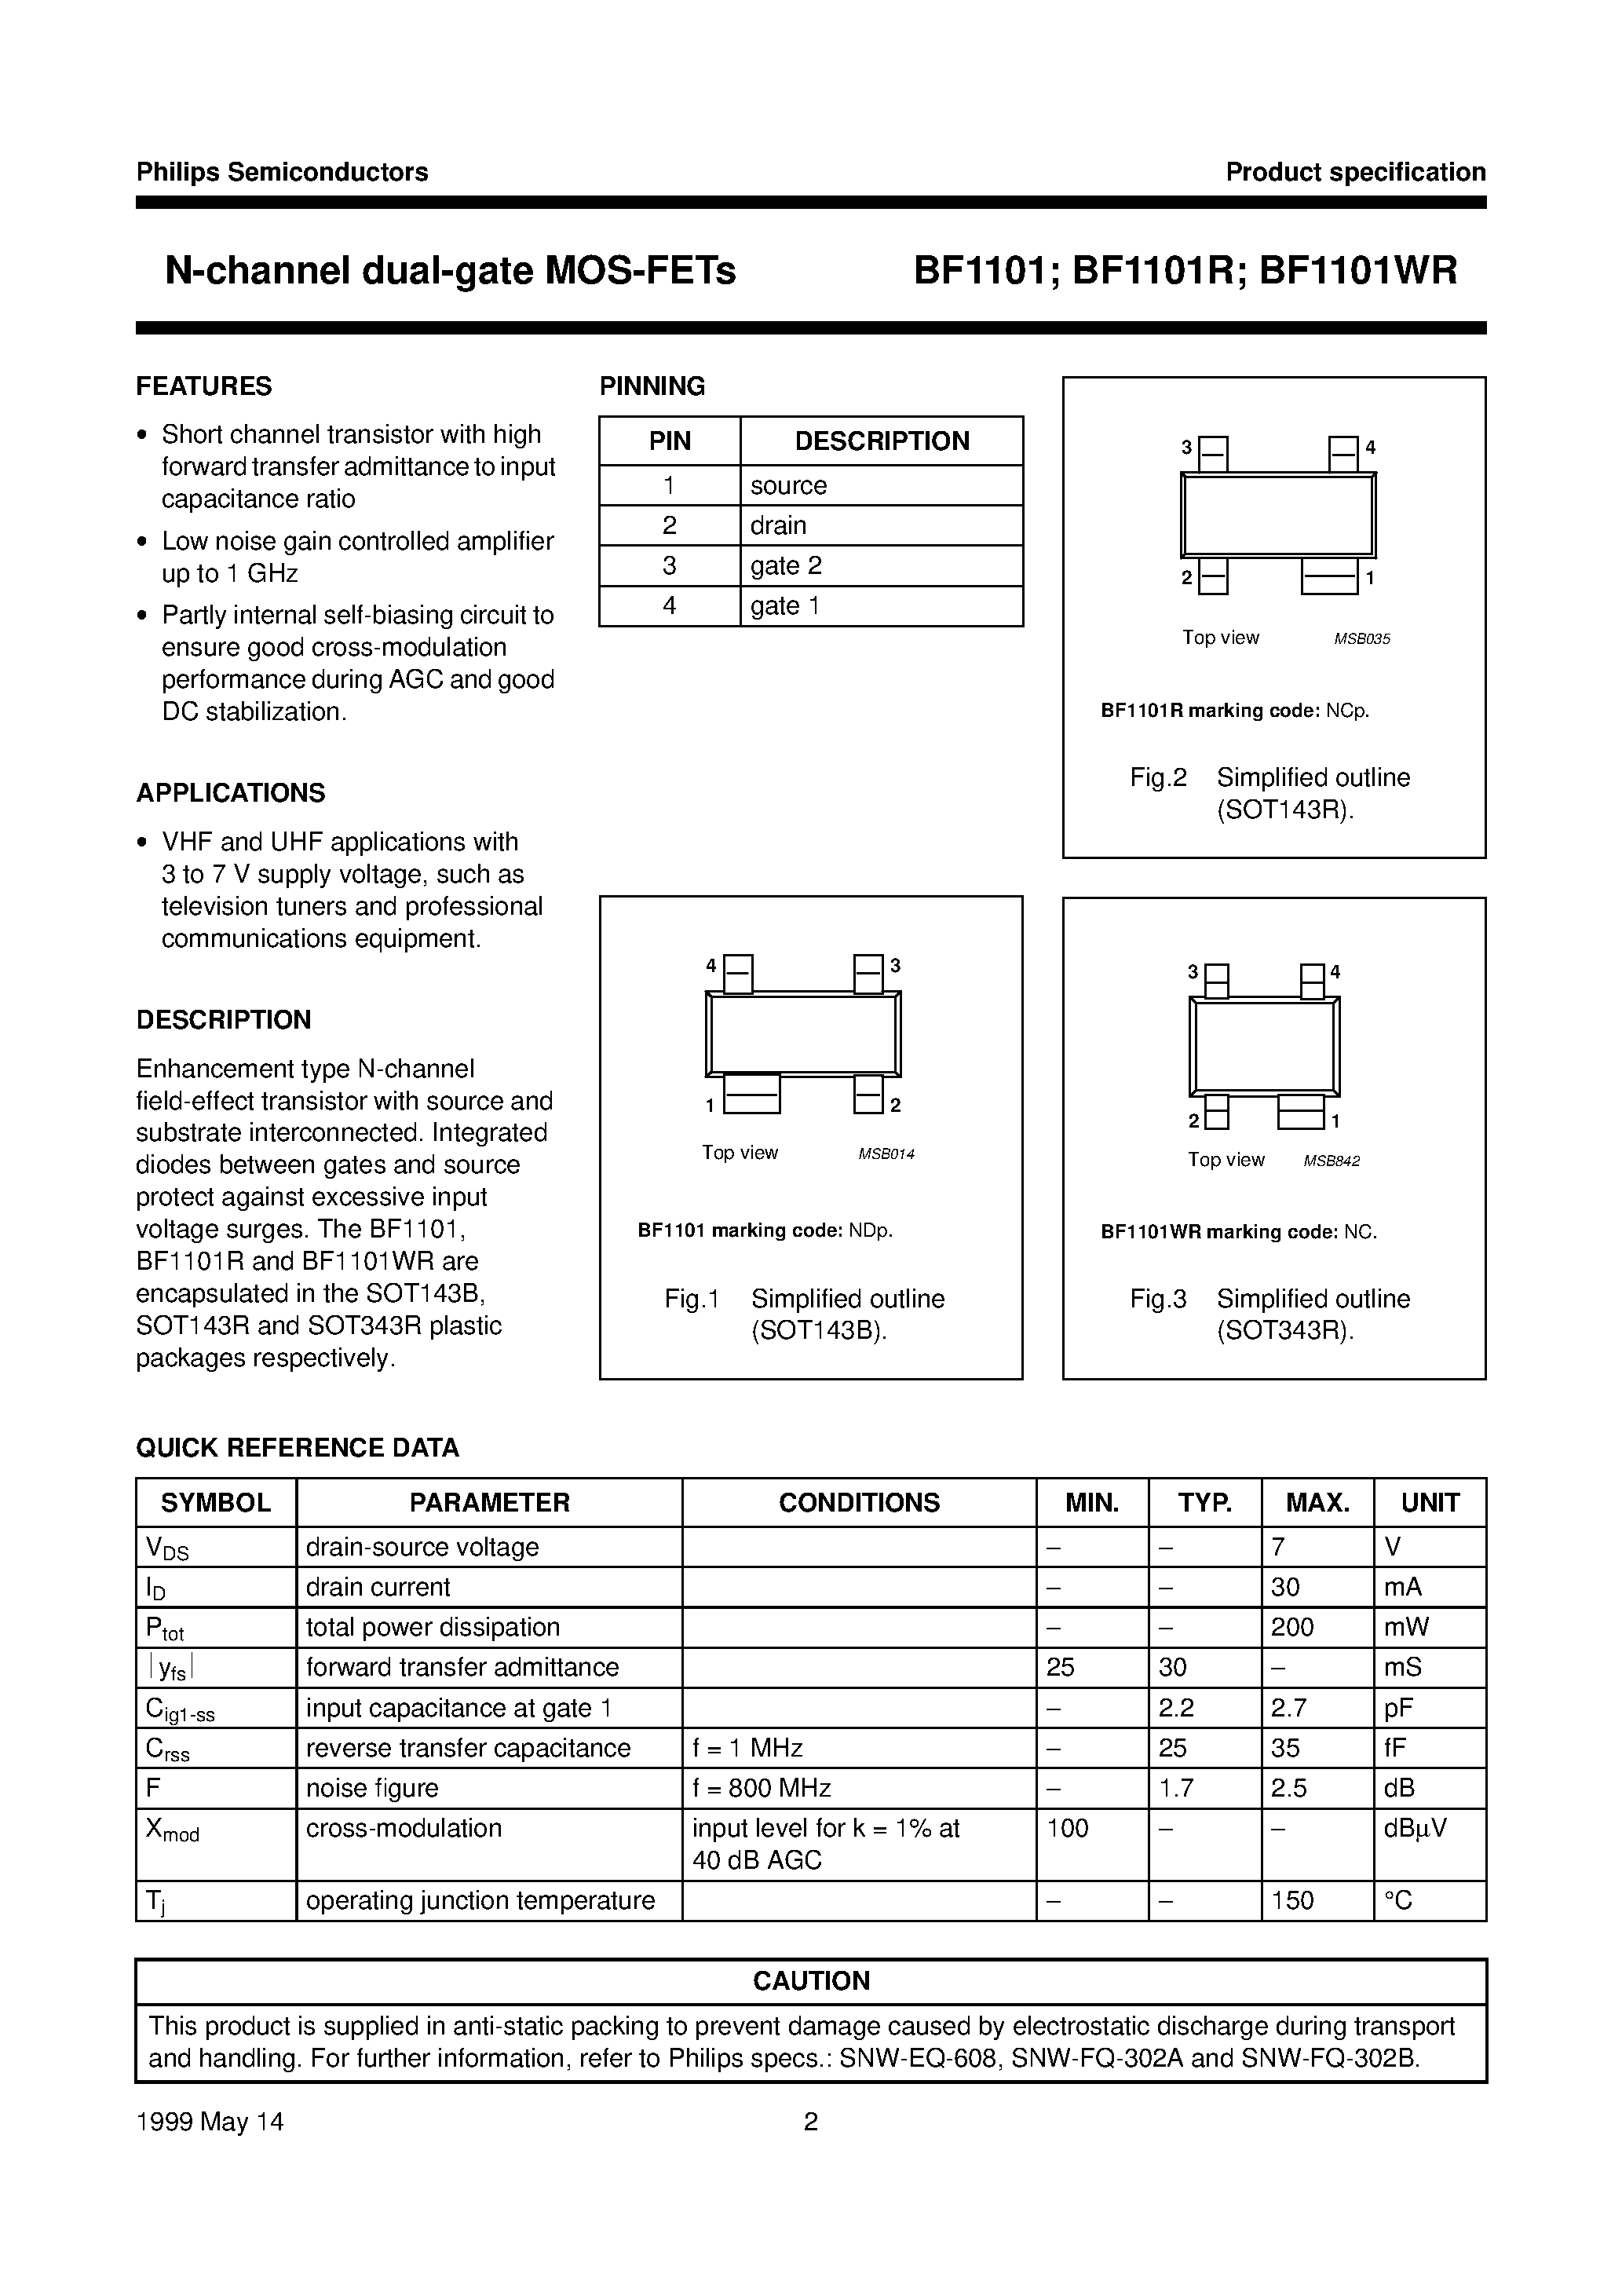 Datasheet BF1101R - N-channel dual-gate MOS-FETs page 2